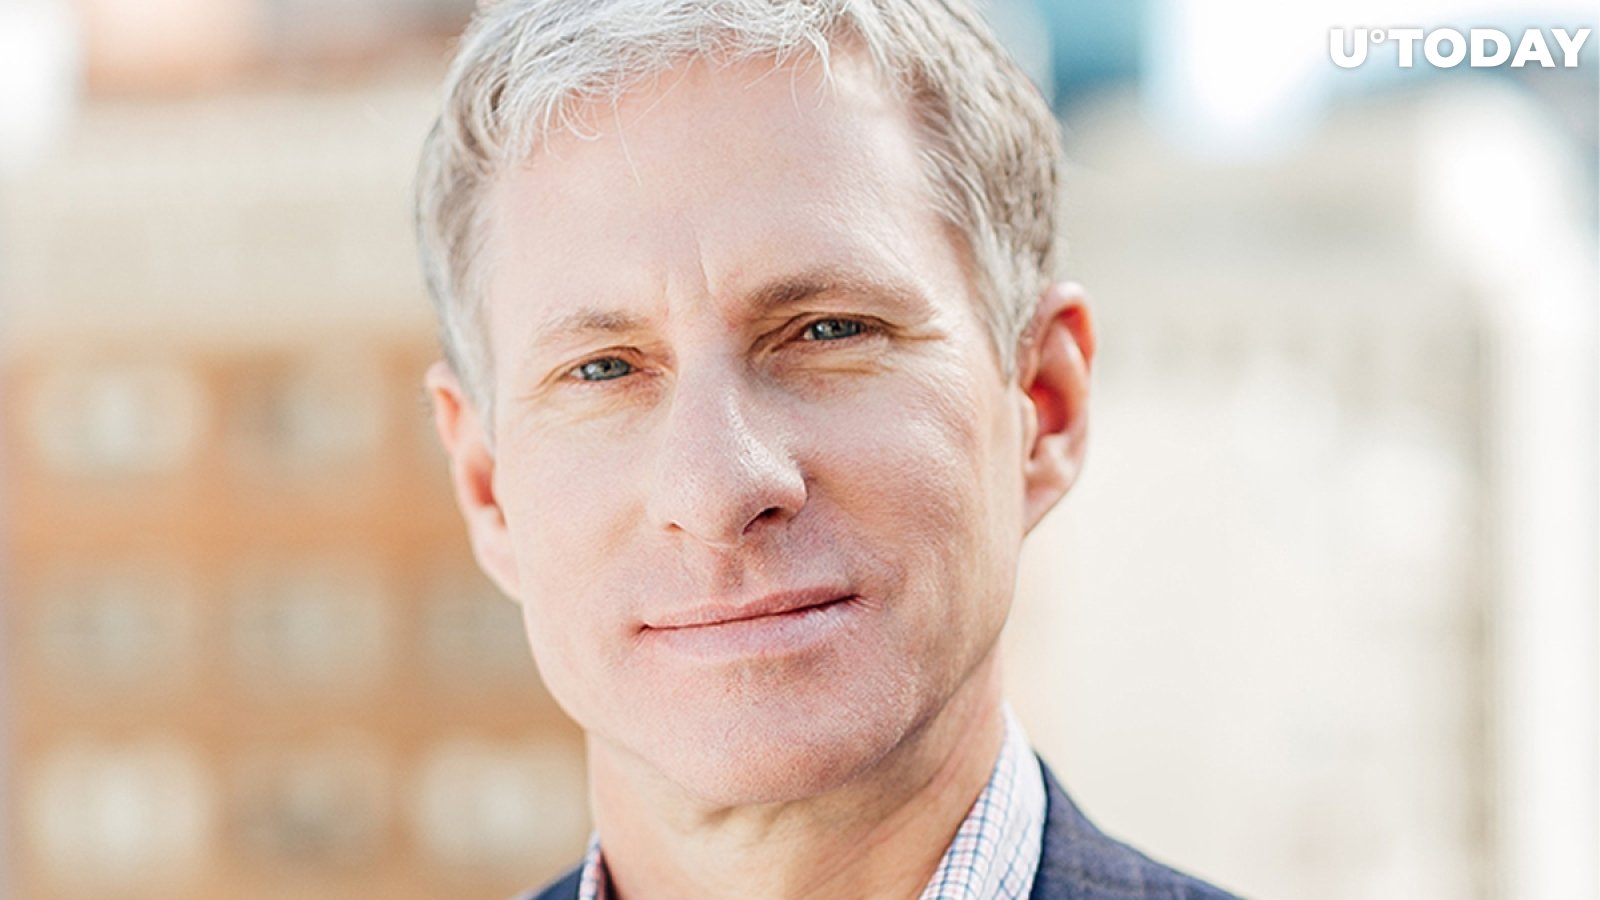 Former Ripple CEO Chris Larsen Wires 75 Mln XRP, Following Large Anon Wallets Sending Same XRP Amount to His Address